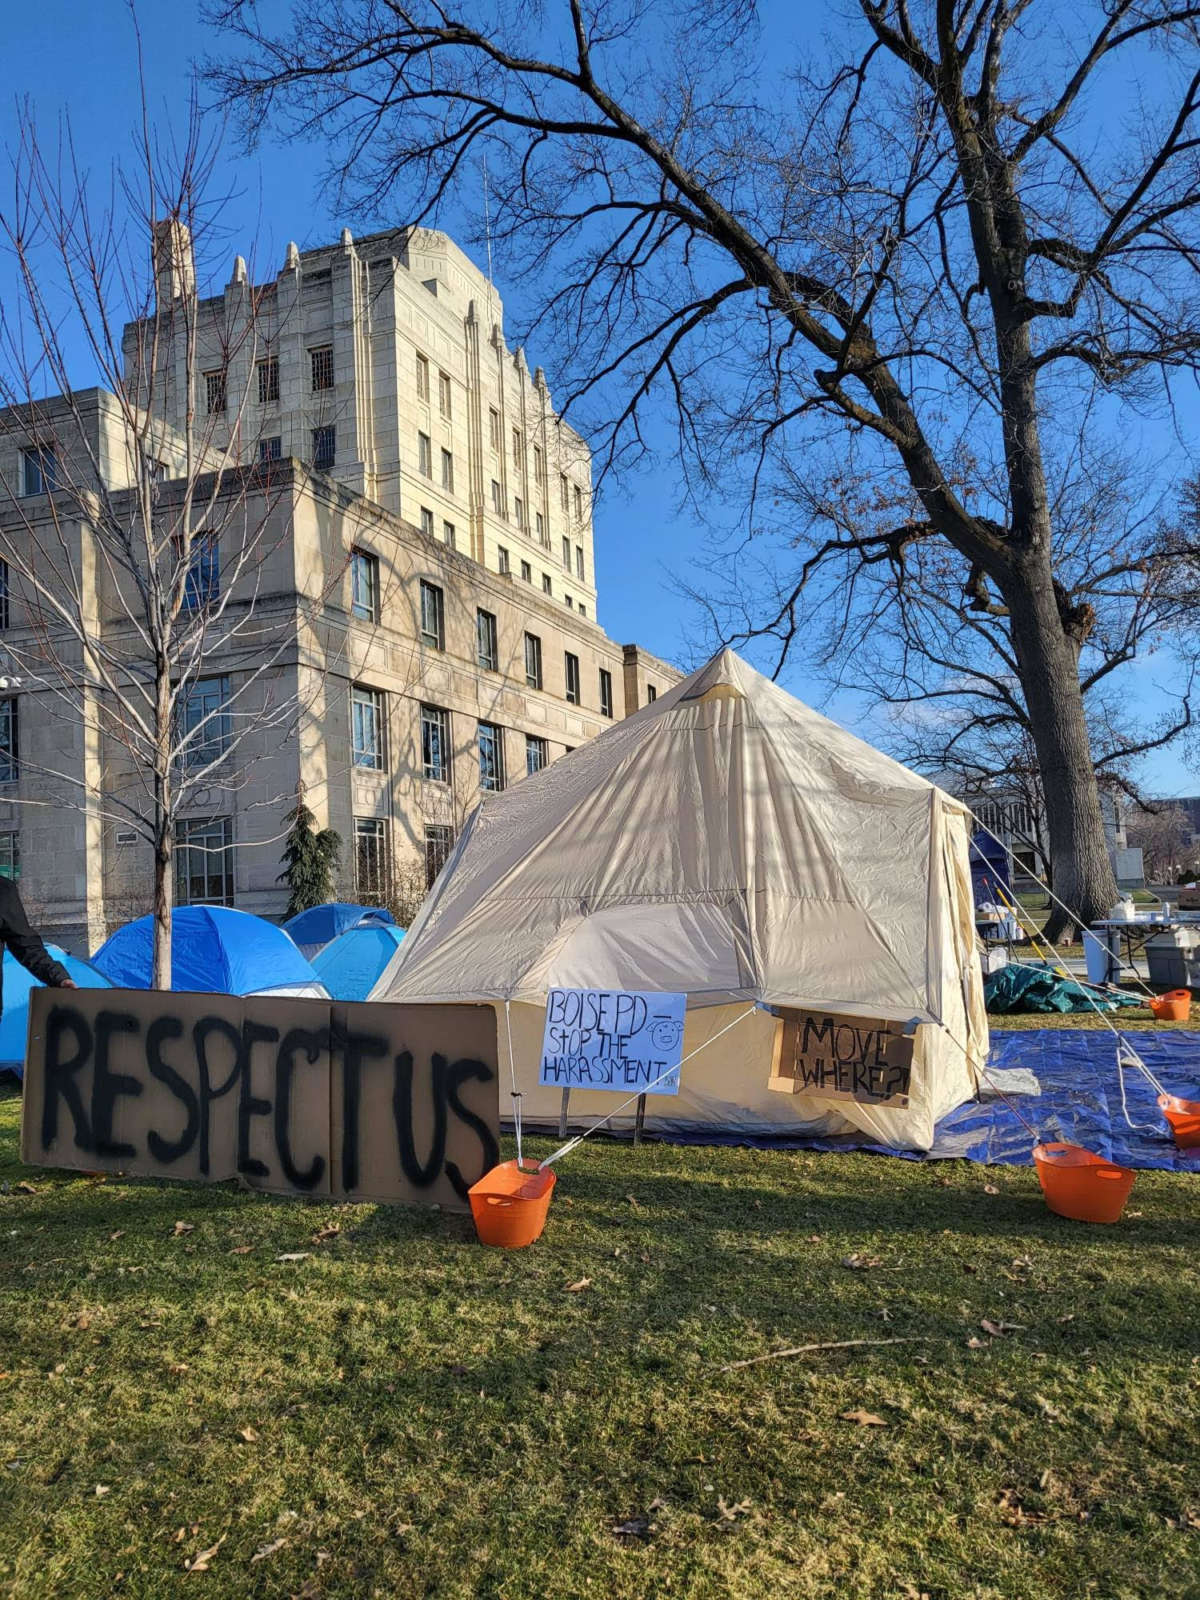 An Idaho government building is visible in the background of tents and signs demanding an end to harassment of the unhoused.